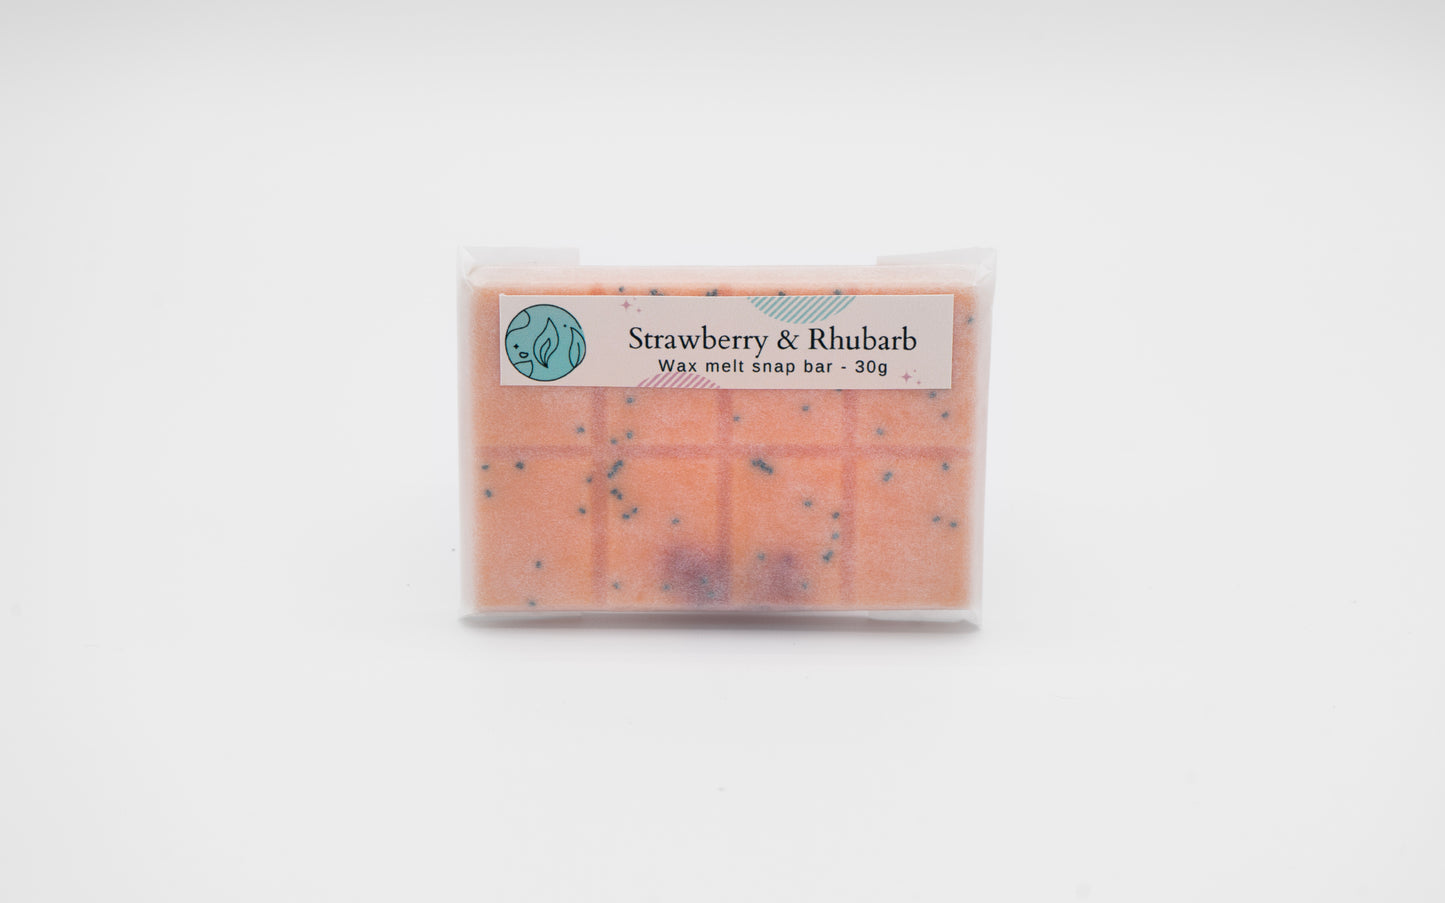 Strawberry and rhubarb fragranced wax melt decorated with poppy seed. 30g or 90g strongly scented wax melt snap bars. Eco friendly waxed paper packaging. Brighton Rock Workshop wax melts made in Spain and the United Kingdom, available in two sizes. Suitable for tea light or electric burners